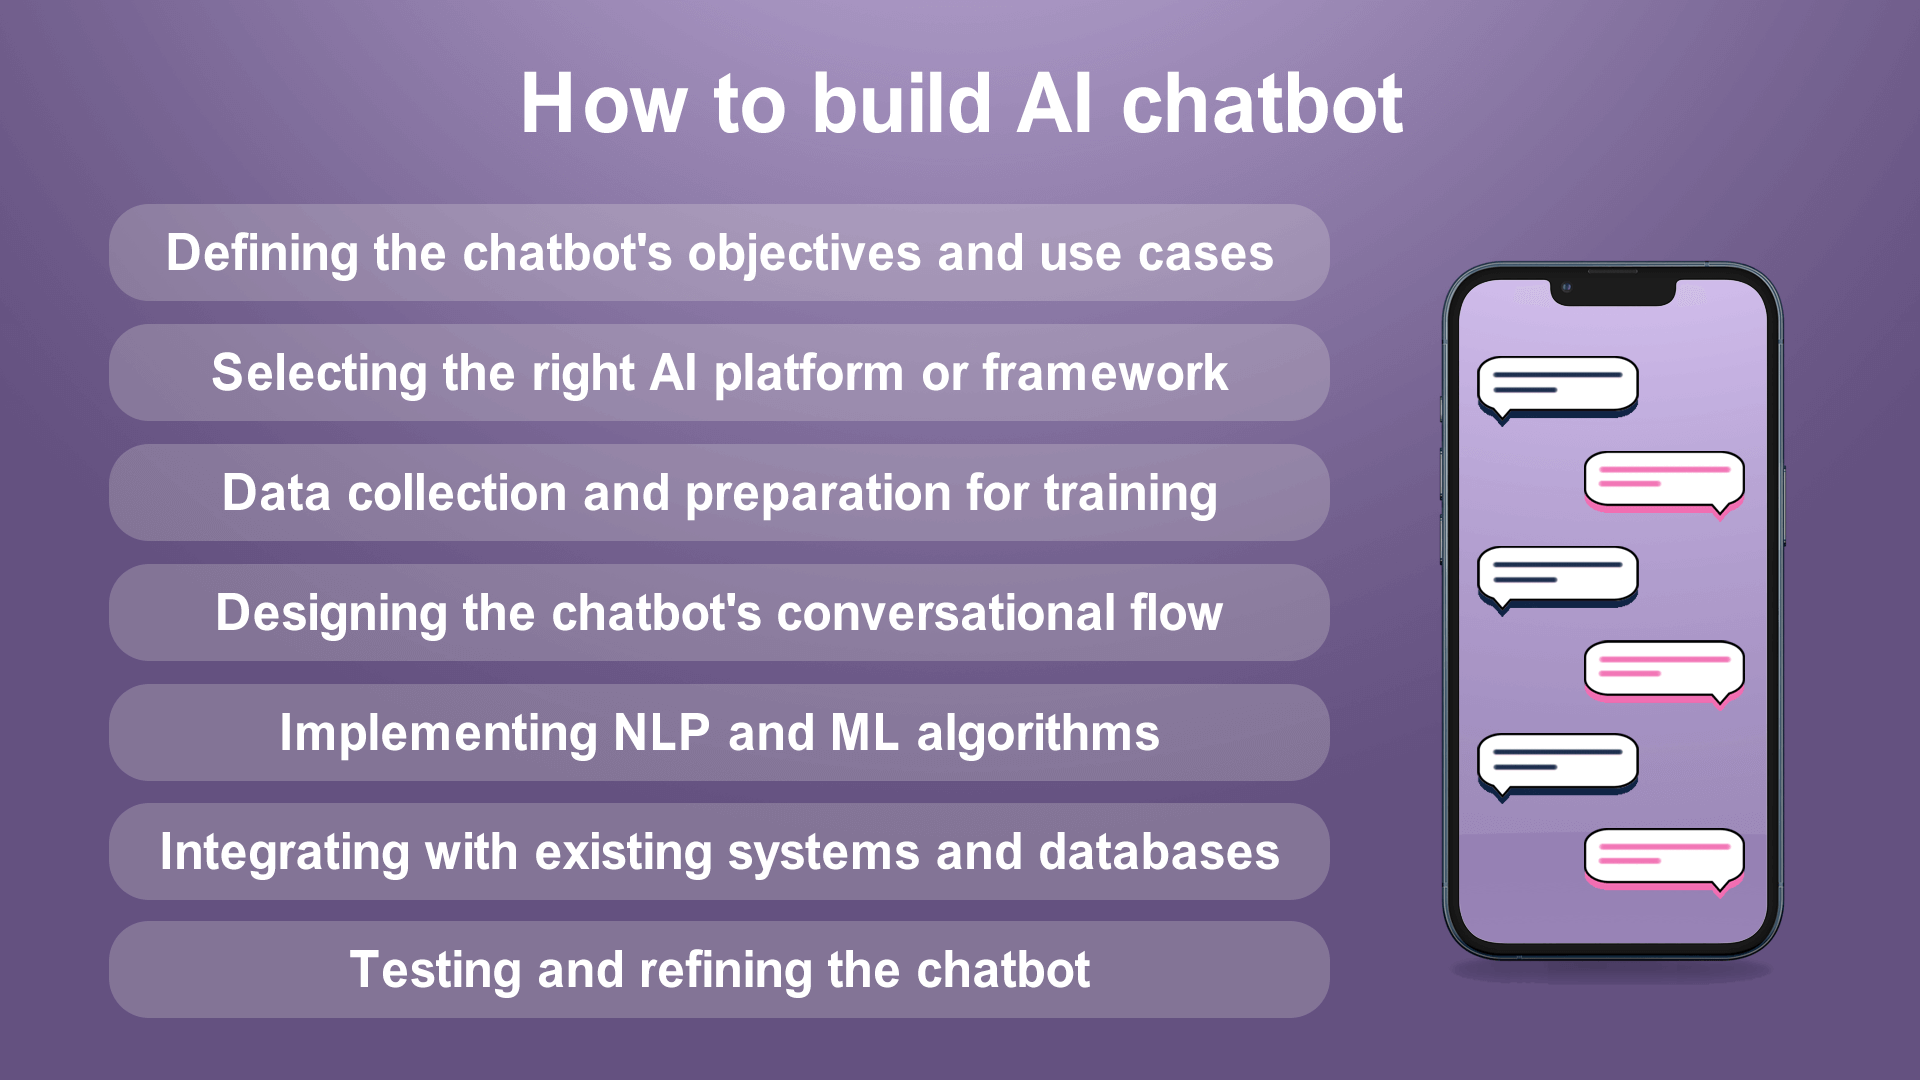 How to build AI chatbot?